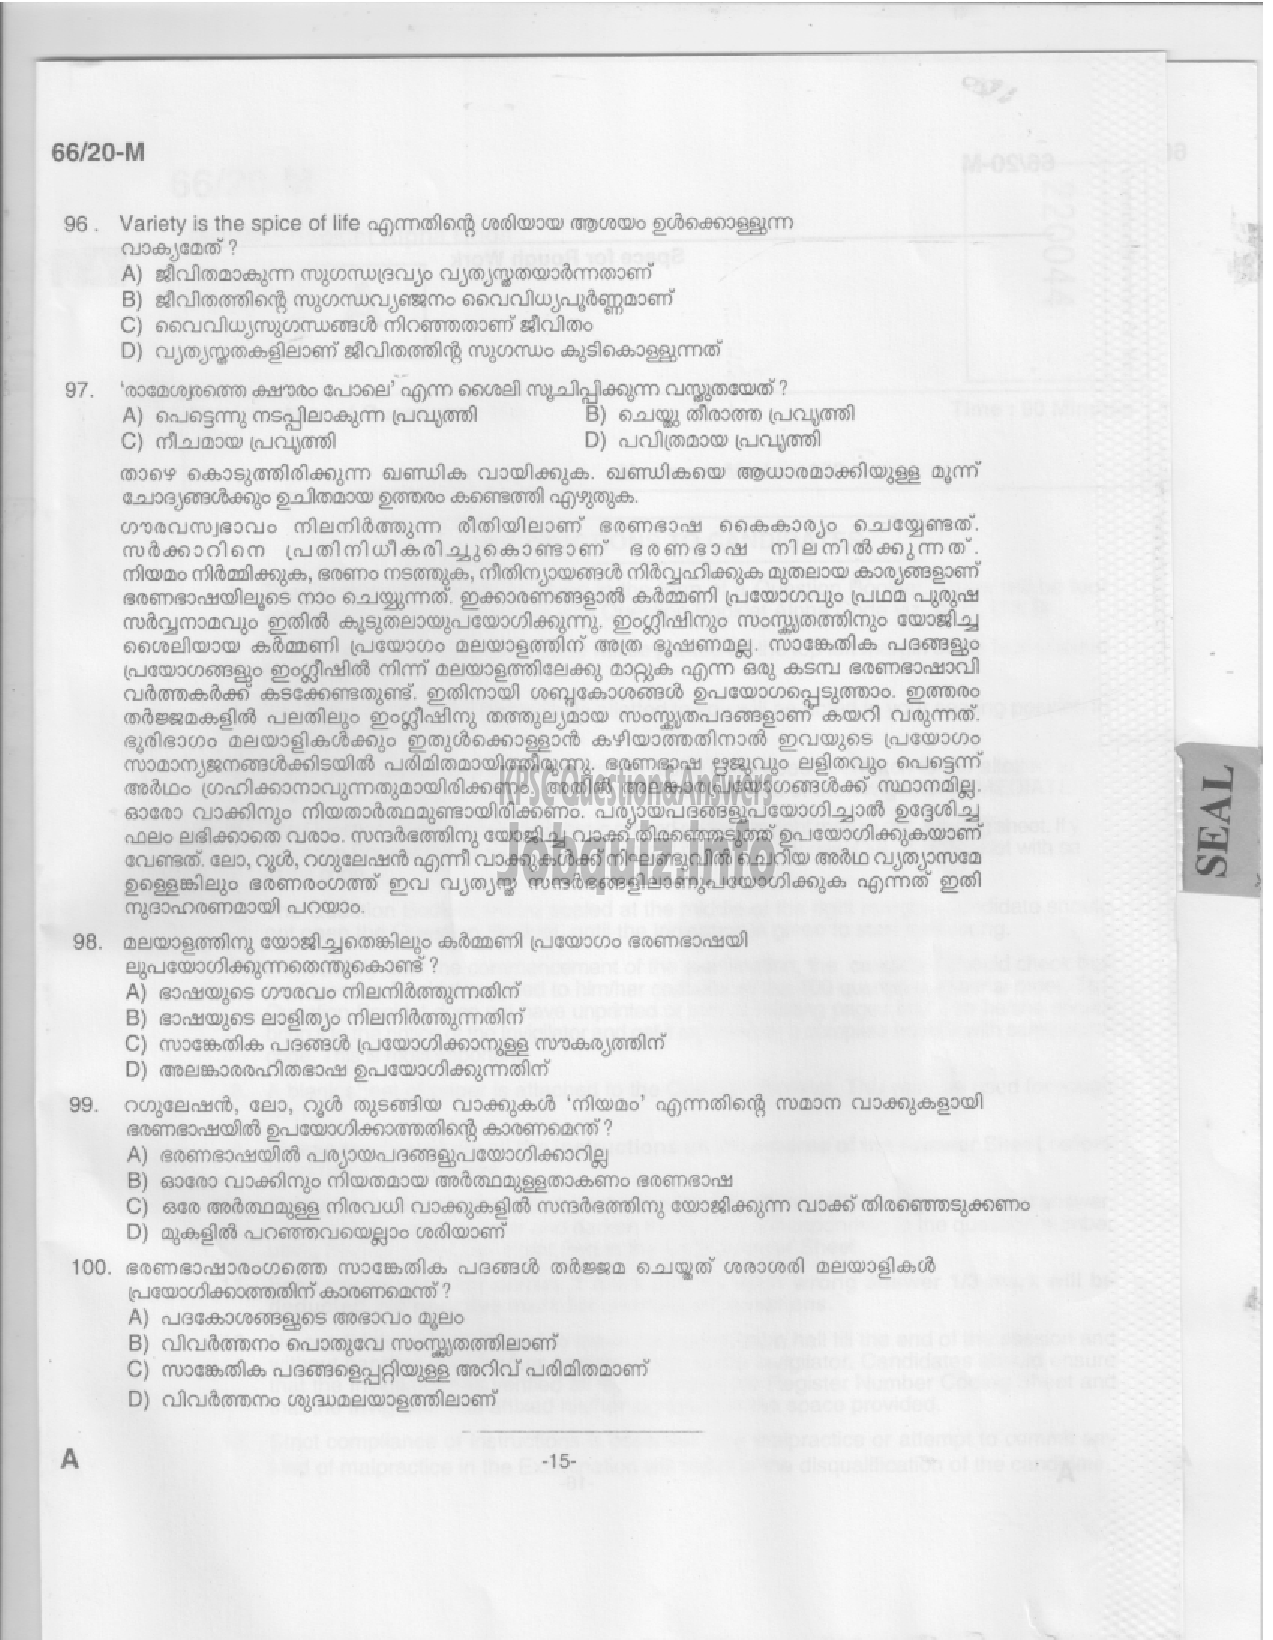 Kerala PSC Question Paper - KAS Officer in Kerala Administrative Service (Supplimentary exam for Gazetted teaching staff in Education Department)-15